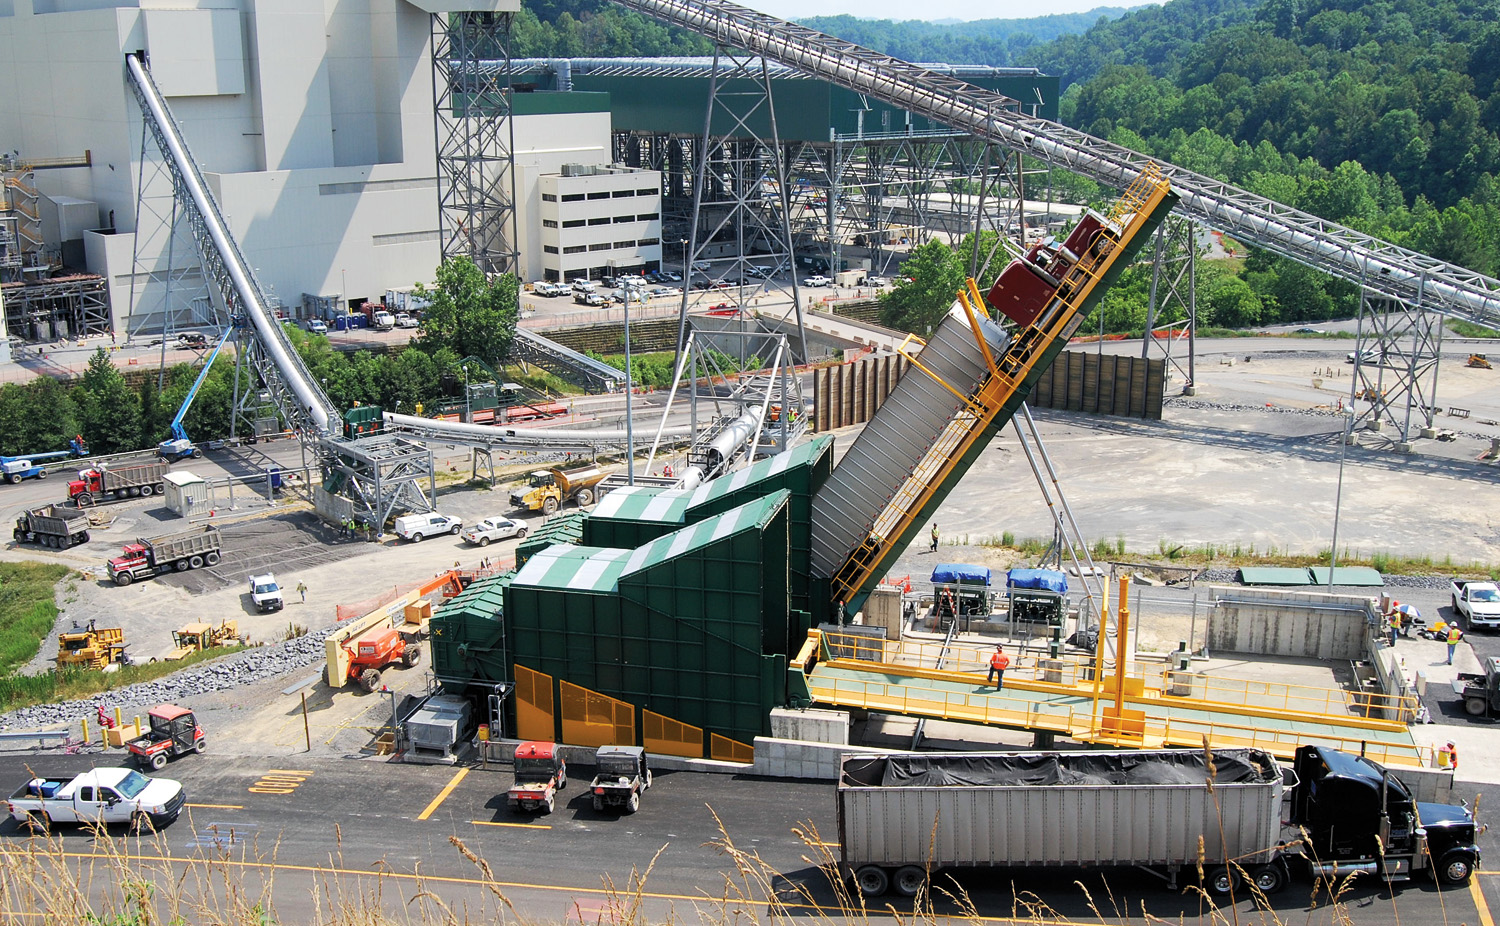 A wood tipper delivers wood waste to the Virginia City circulating fluidized bed plant, which can burn up to 20 percent biomass along with coal.